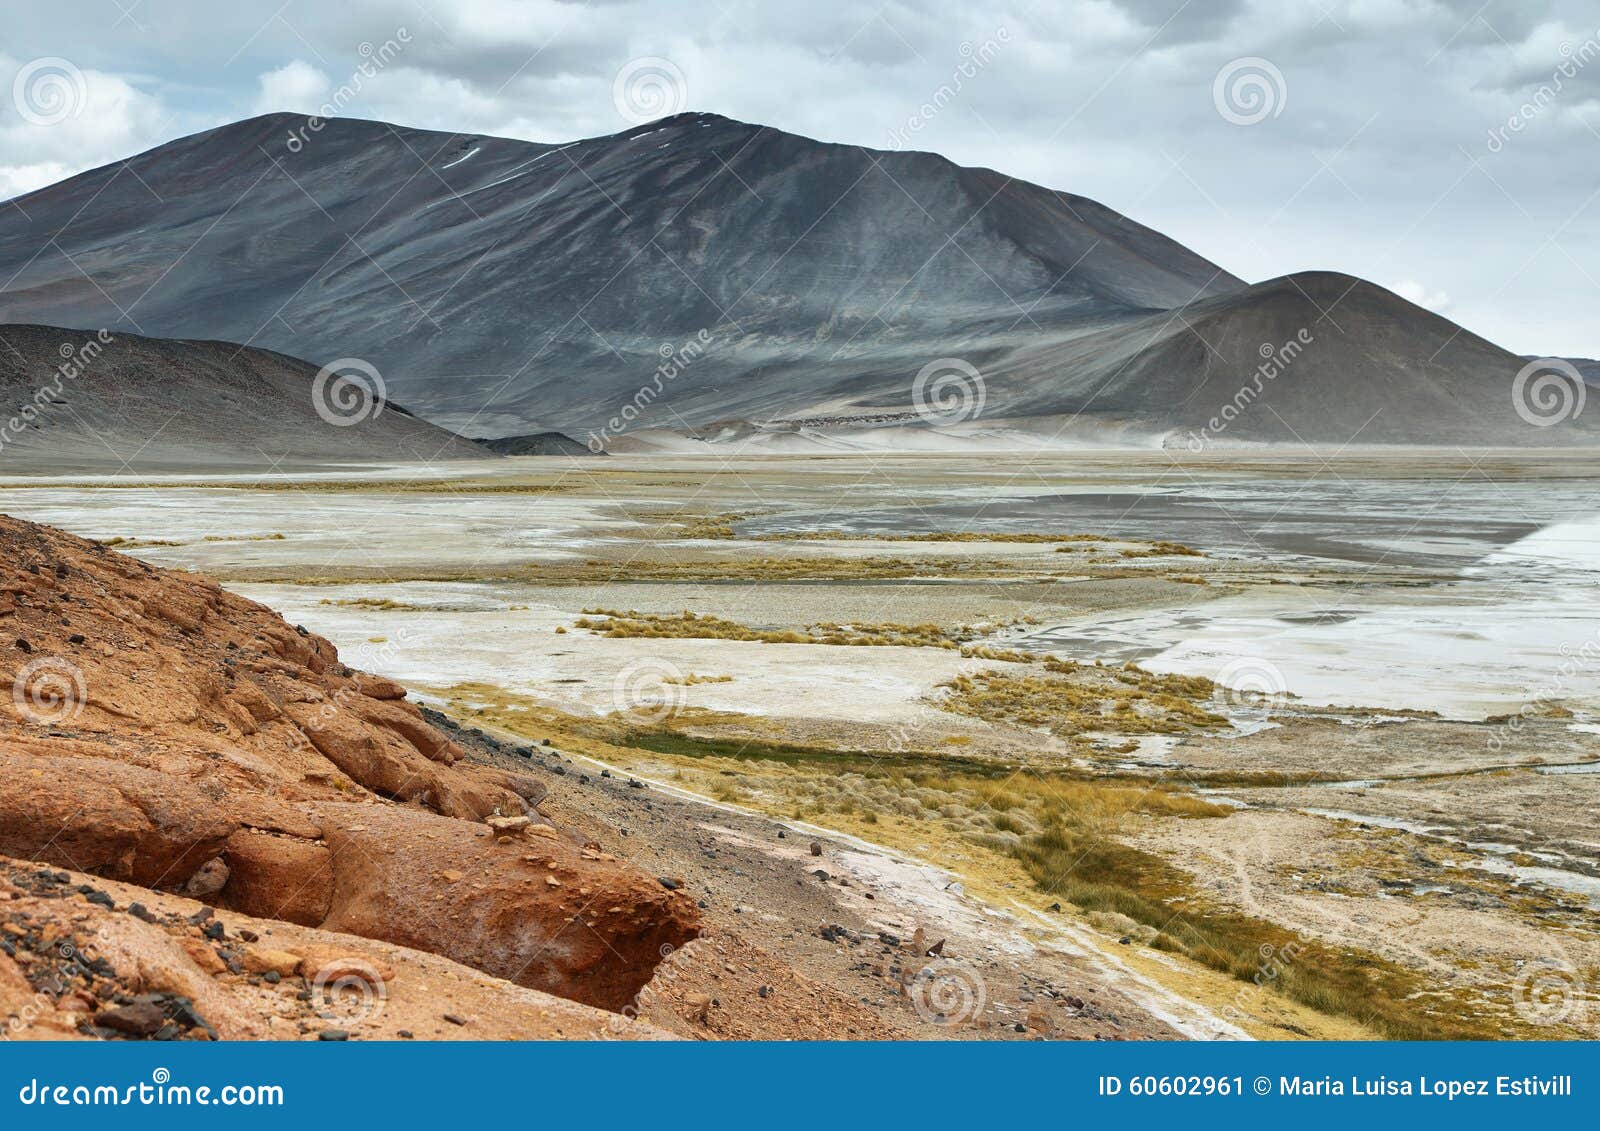 view of mountains and aguas calientes or piedras rojas salt lake in sico pass